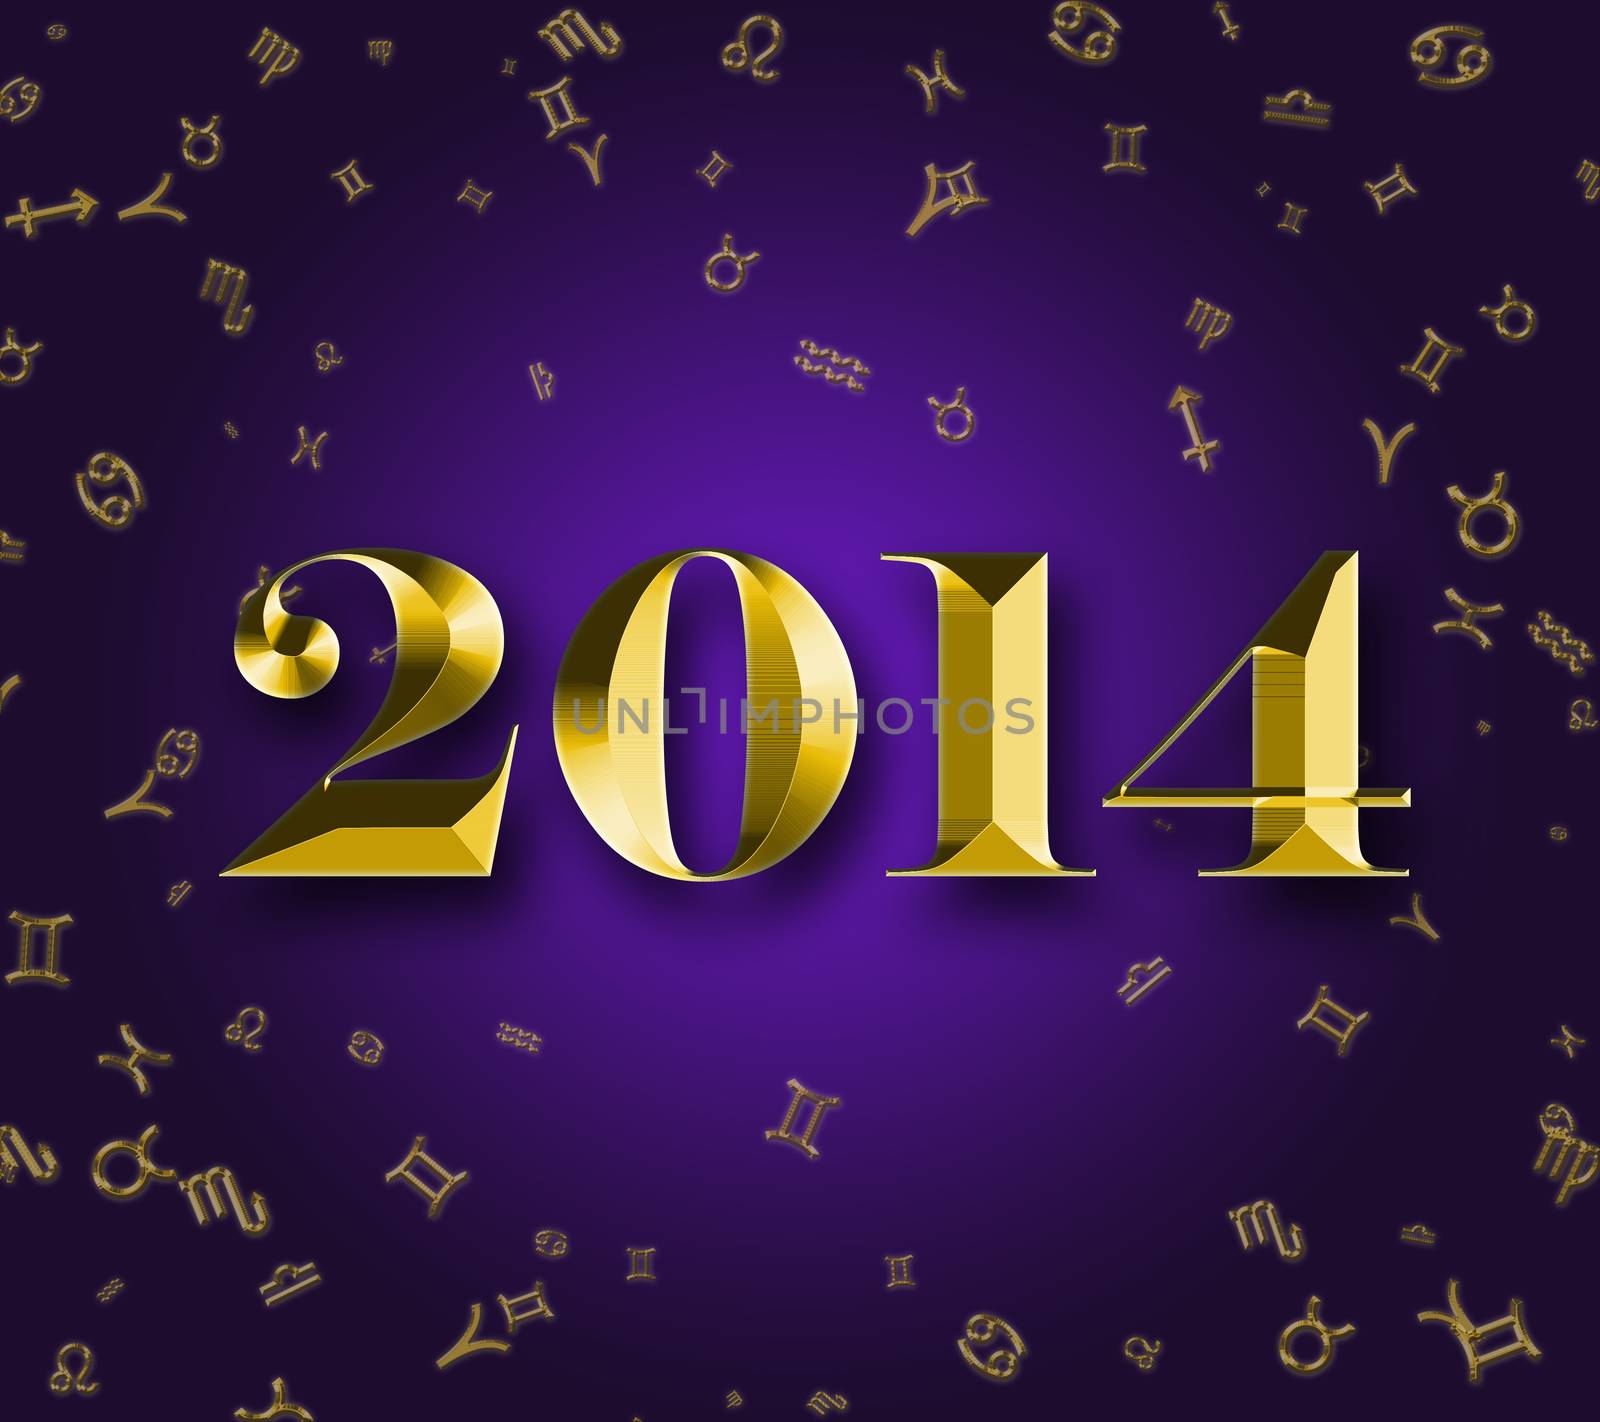 golden 2014 and astrology signs in dark violet background by Dddaca